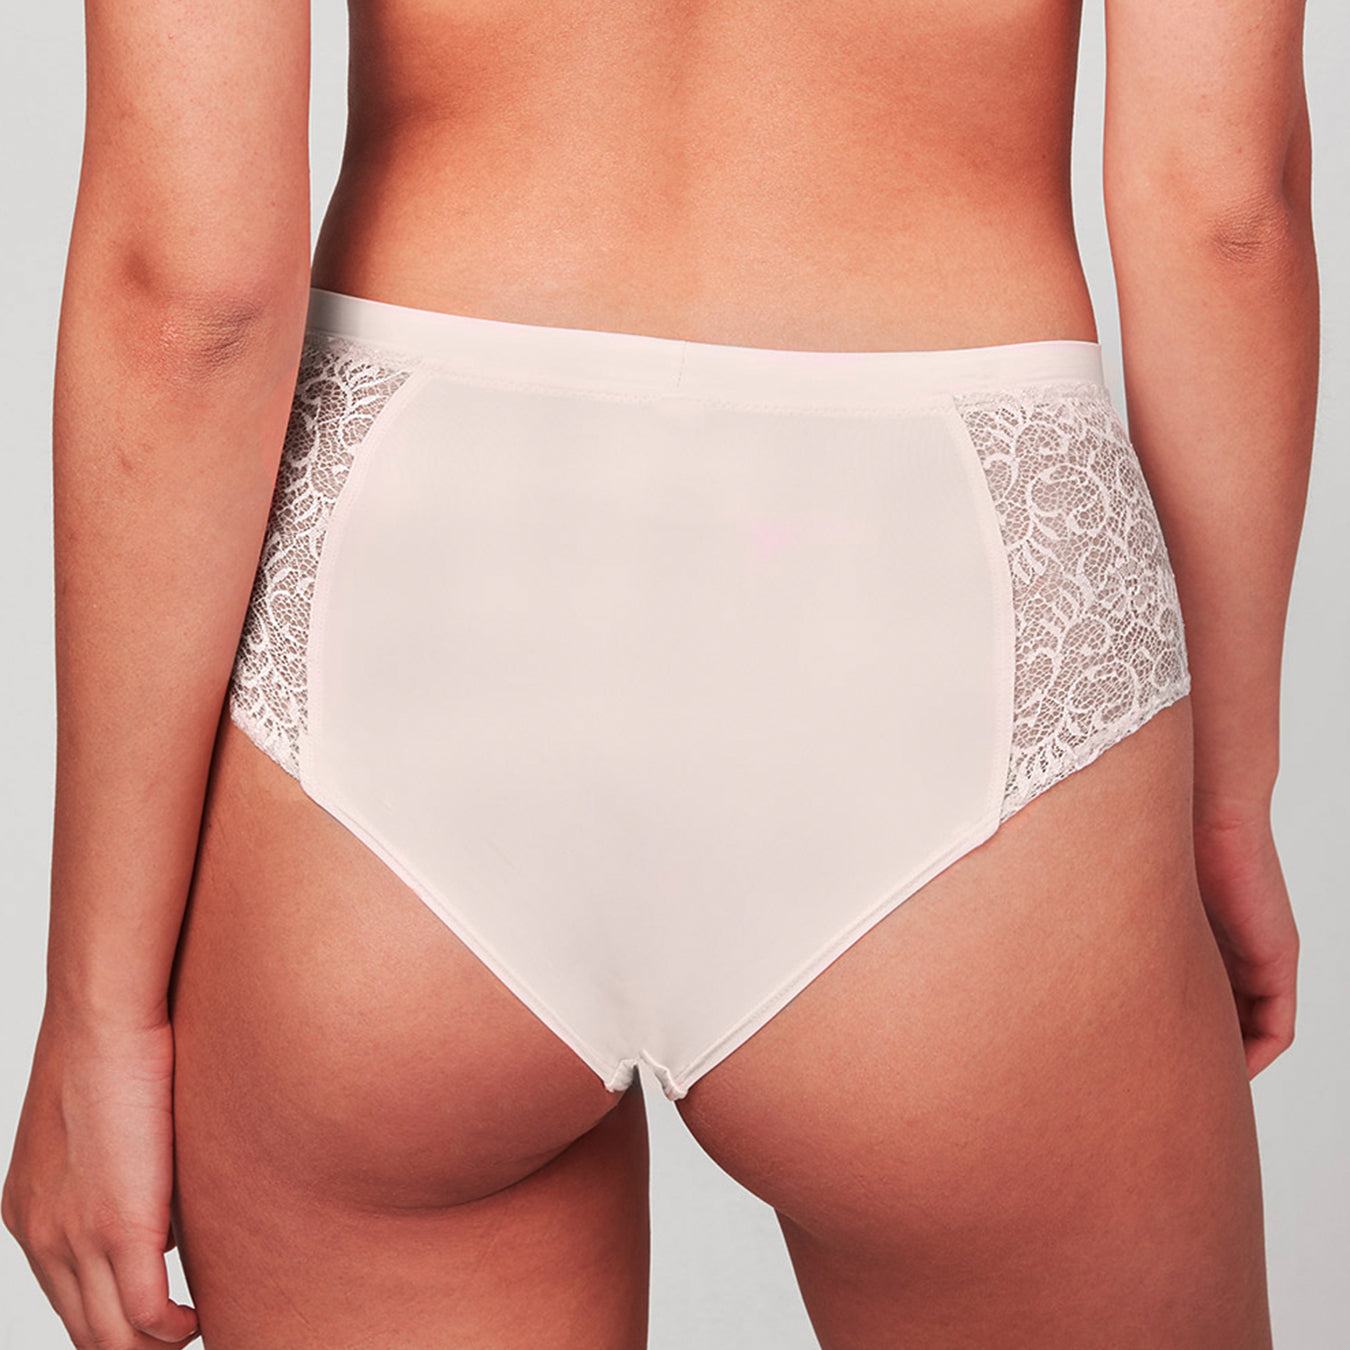 Crosby High-Rise Brief

The Embrace of Italian Lace.
Our Crosby High-Rise Brief is designed to embrace your curves with a dash of ultra soft Italian lace. Slip into this high waisted brieCrosby High-Rise